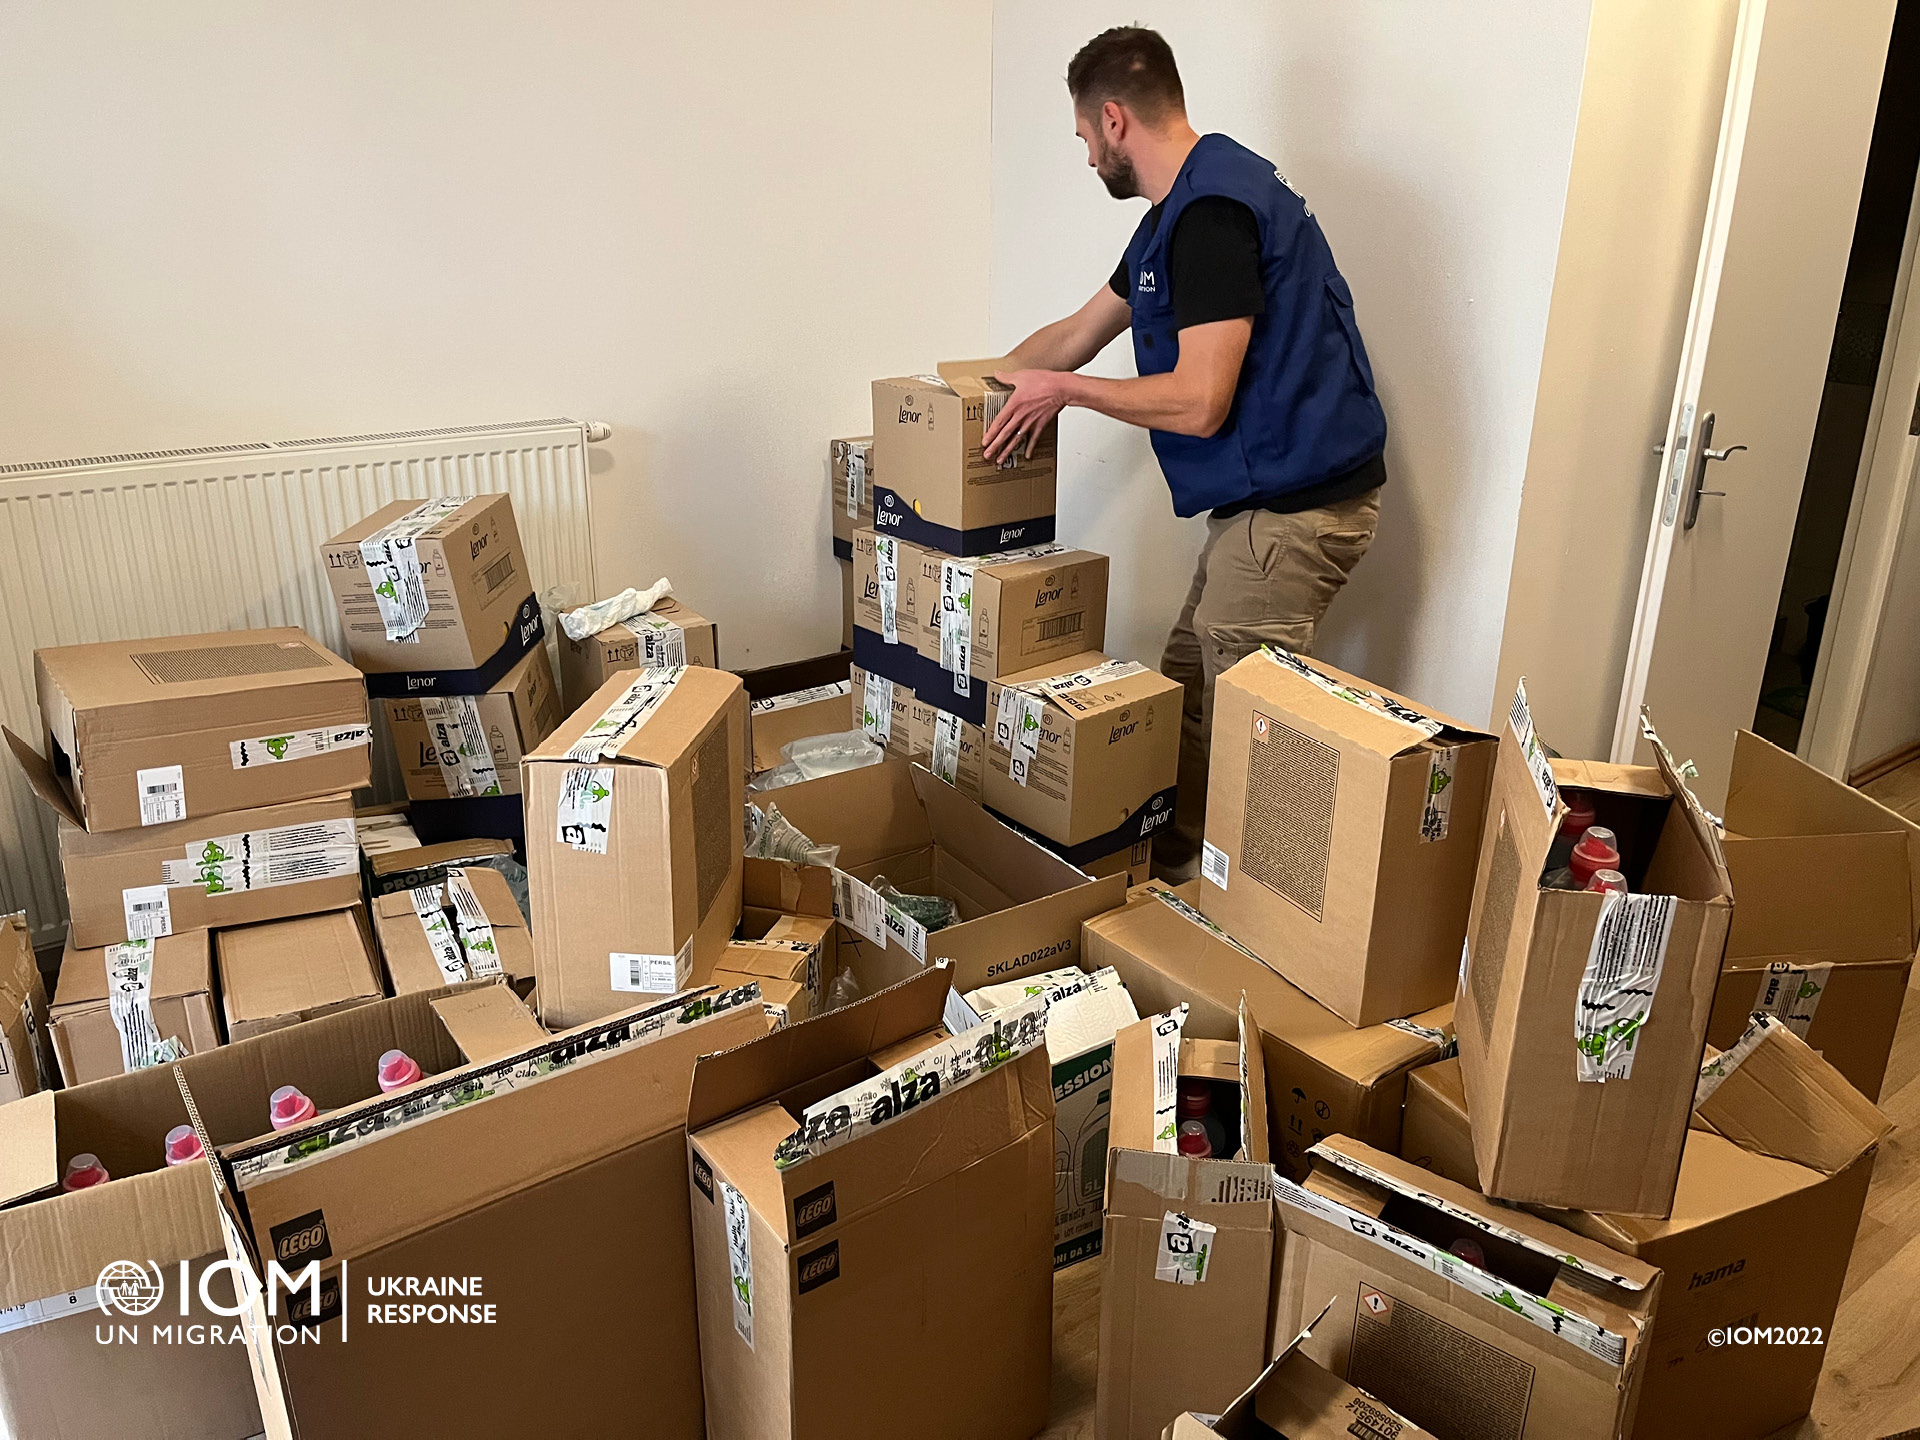 IOM also supplied the facility with 686 pieces of hygienic items. Photo © International Organization for Migration (IOM) 2022.